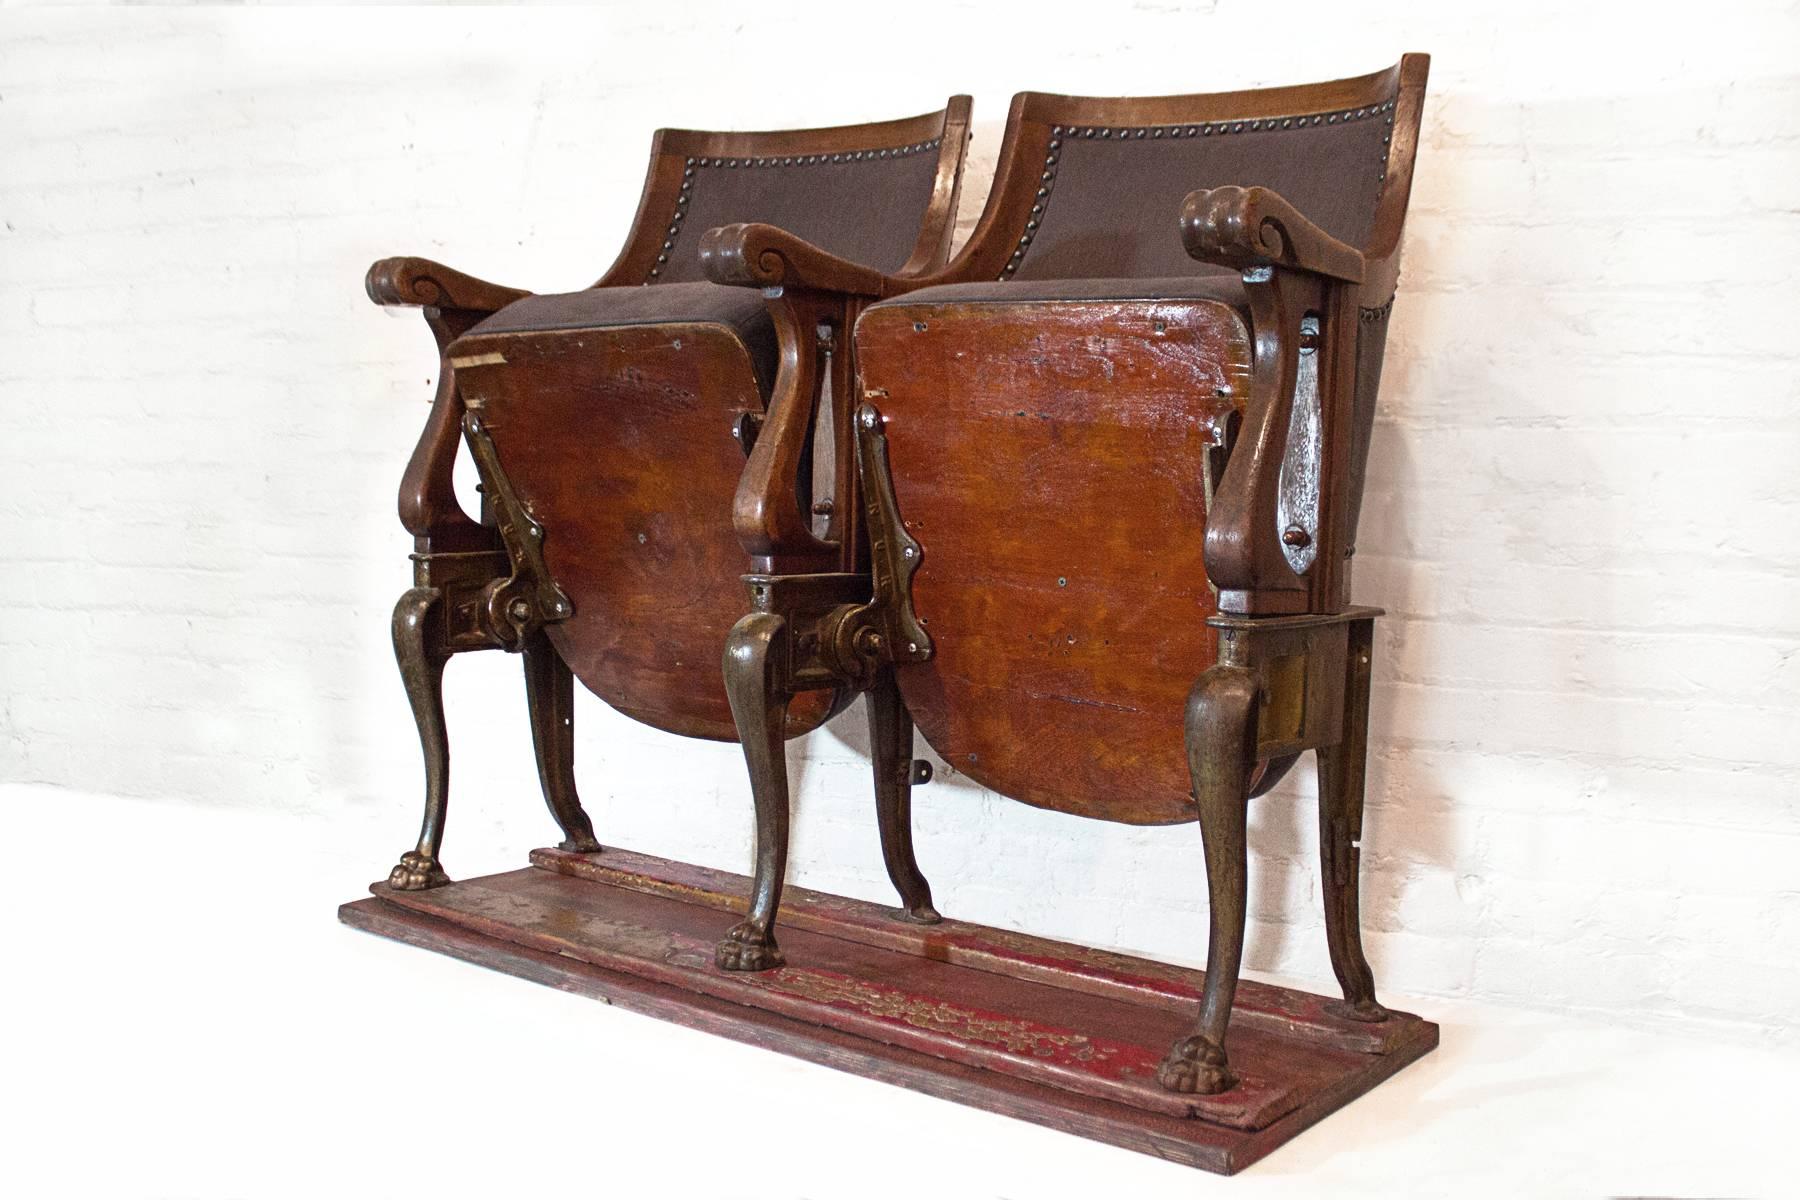 Set of two late 19th century theater seats mounted on wood base. Cast iron legs & hardware with wonderfully refurbished wood. Gray linen upholstery with black upholstery tacks. Very comfortable. Perfect for the home or office.

Dimensions: 29